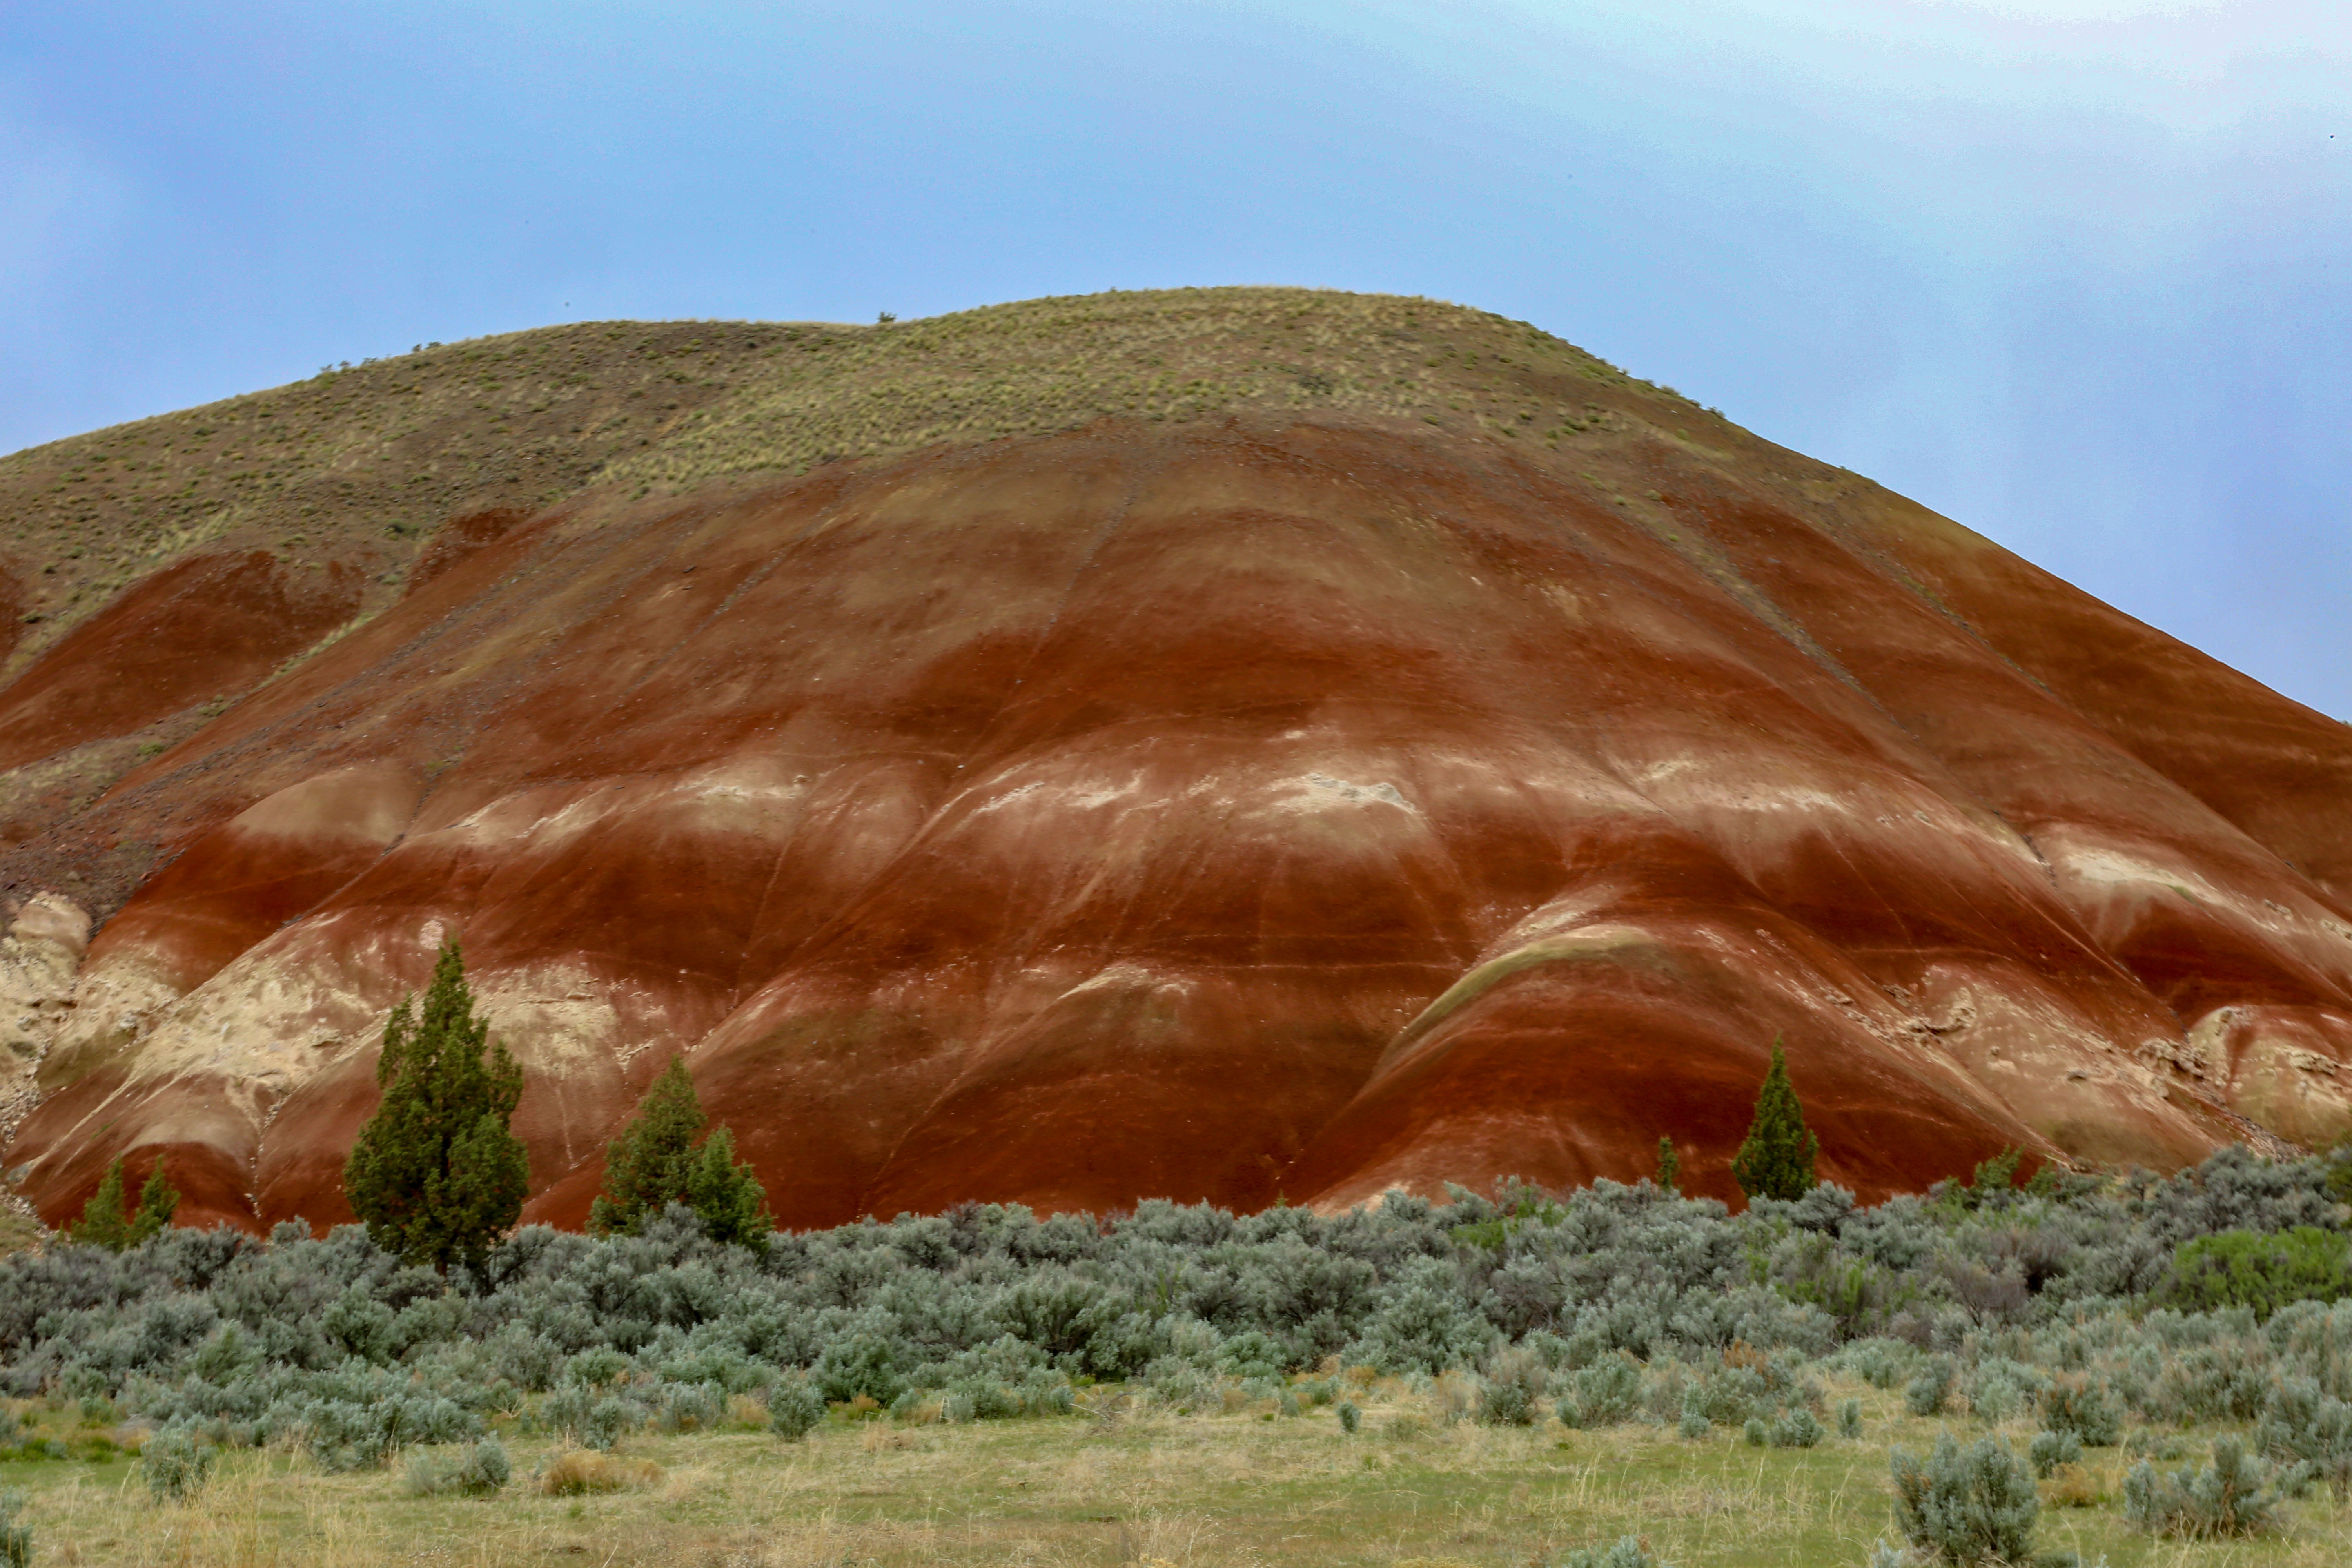 Painted Hills as seen from the bottom of one of the painted mounds